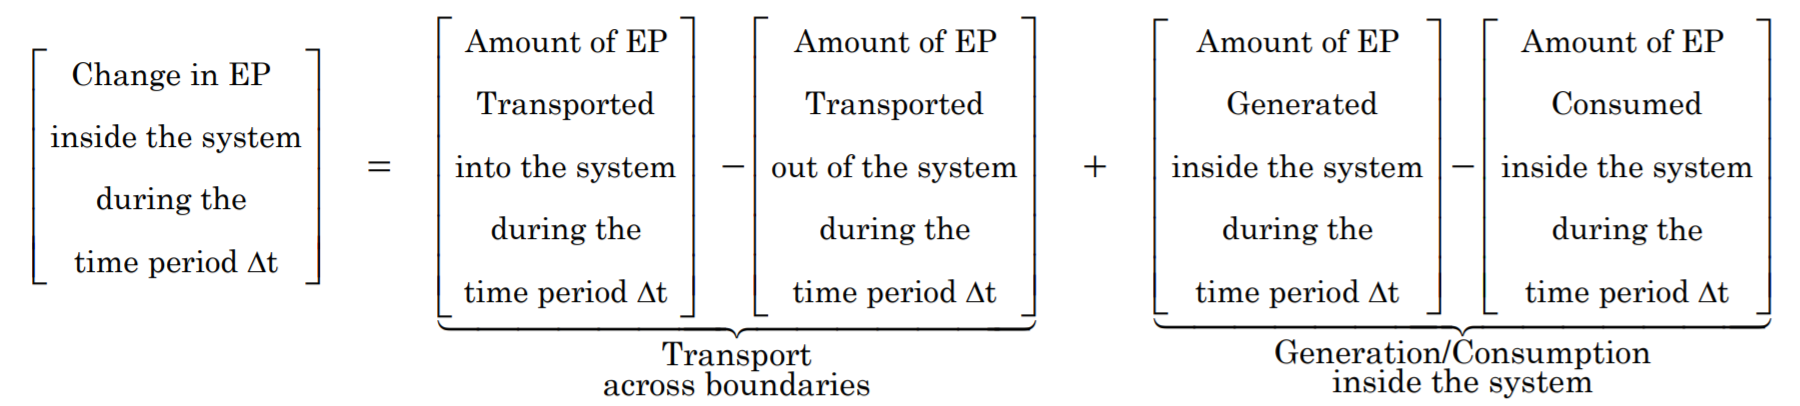 The change in EP inside the system during time period delta T equals the transport across boundaries (namely, the amount of EP transported into the system during the time period minus the amount of EP transferred out during this period) plus the generation/consumption inside the system (namely the amount of EP generated inside the system during this period minus the amount of EP consumed inside the system during this period).